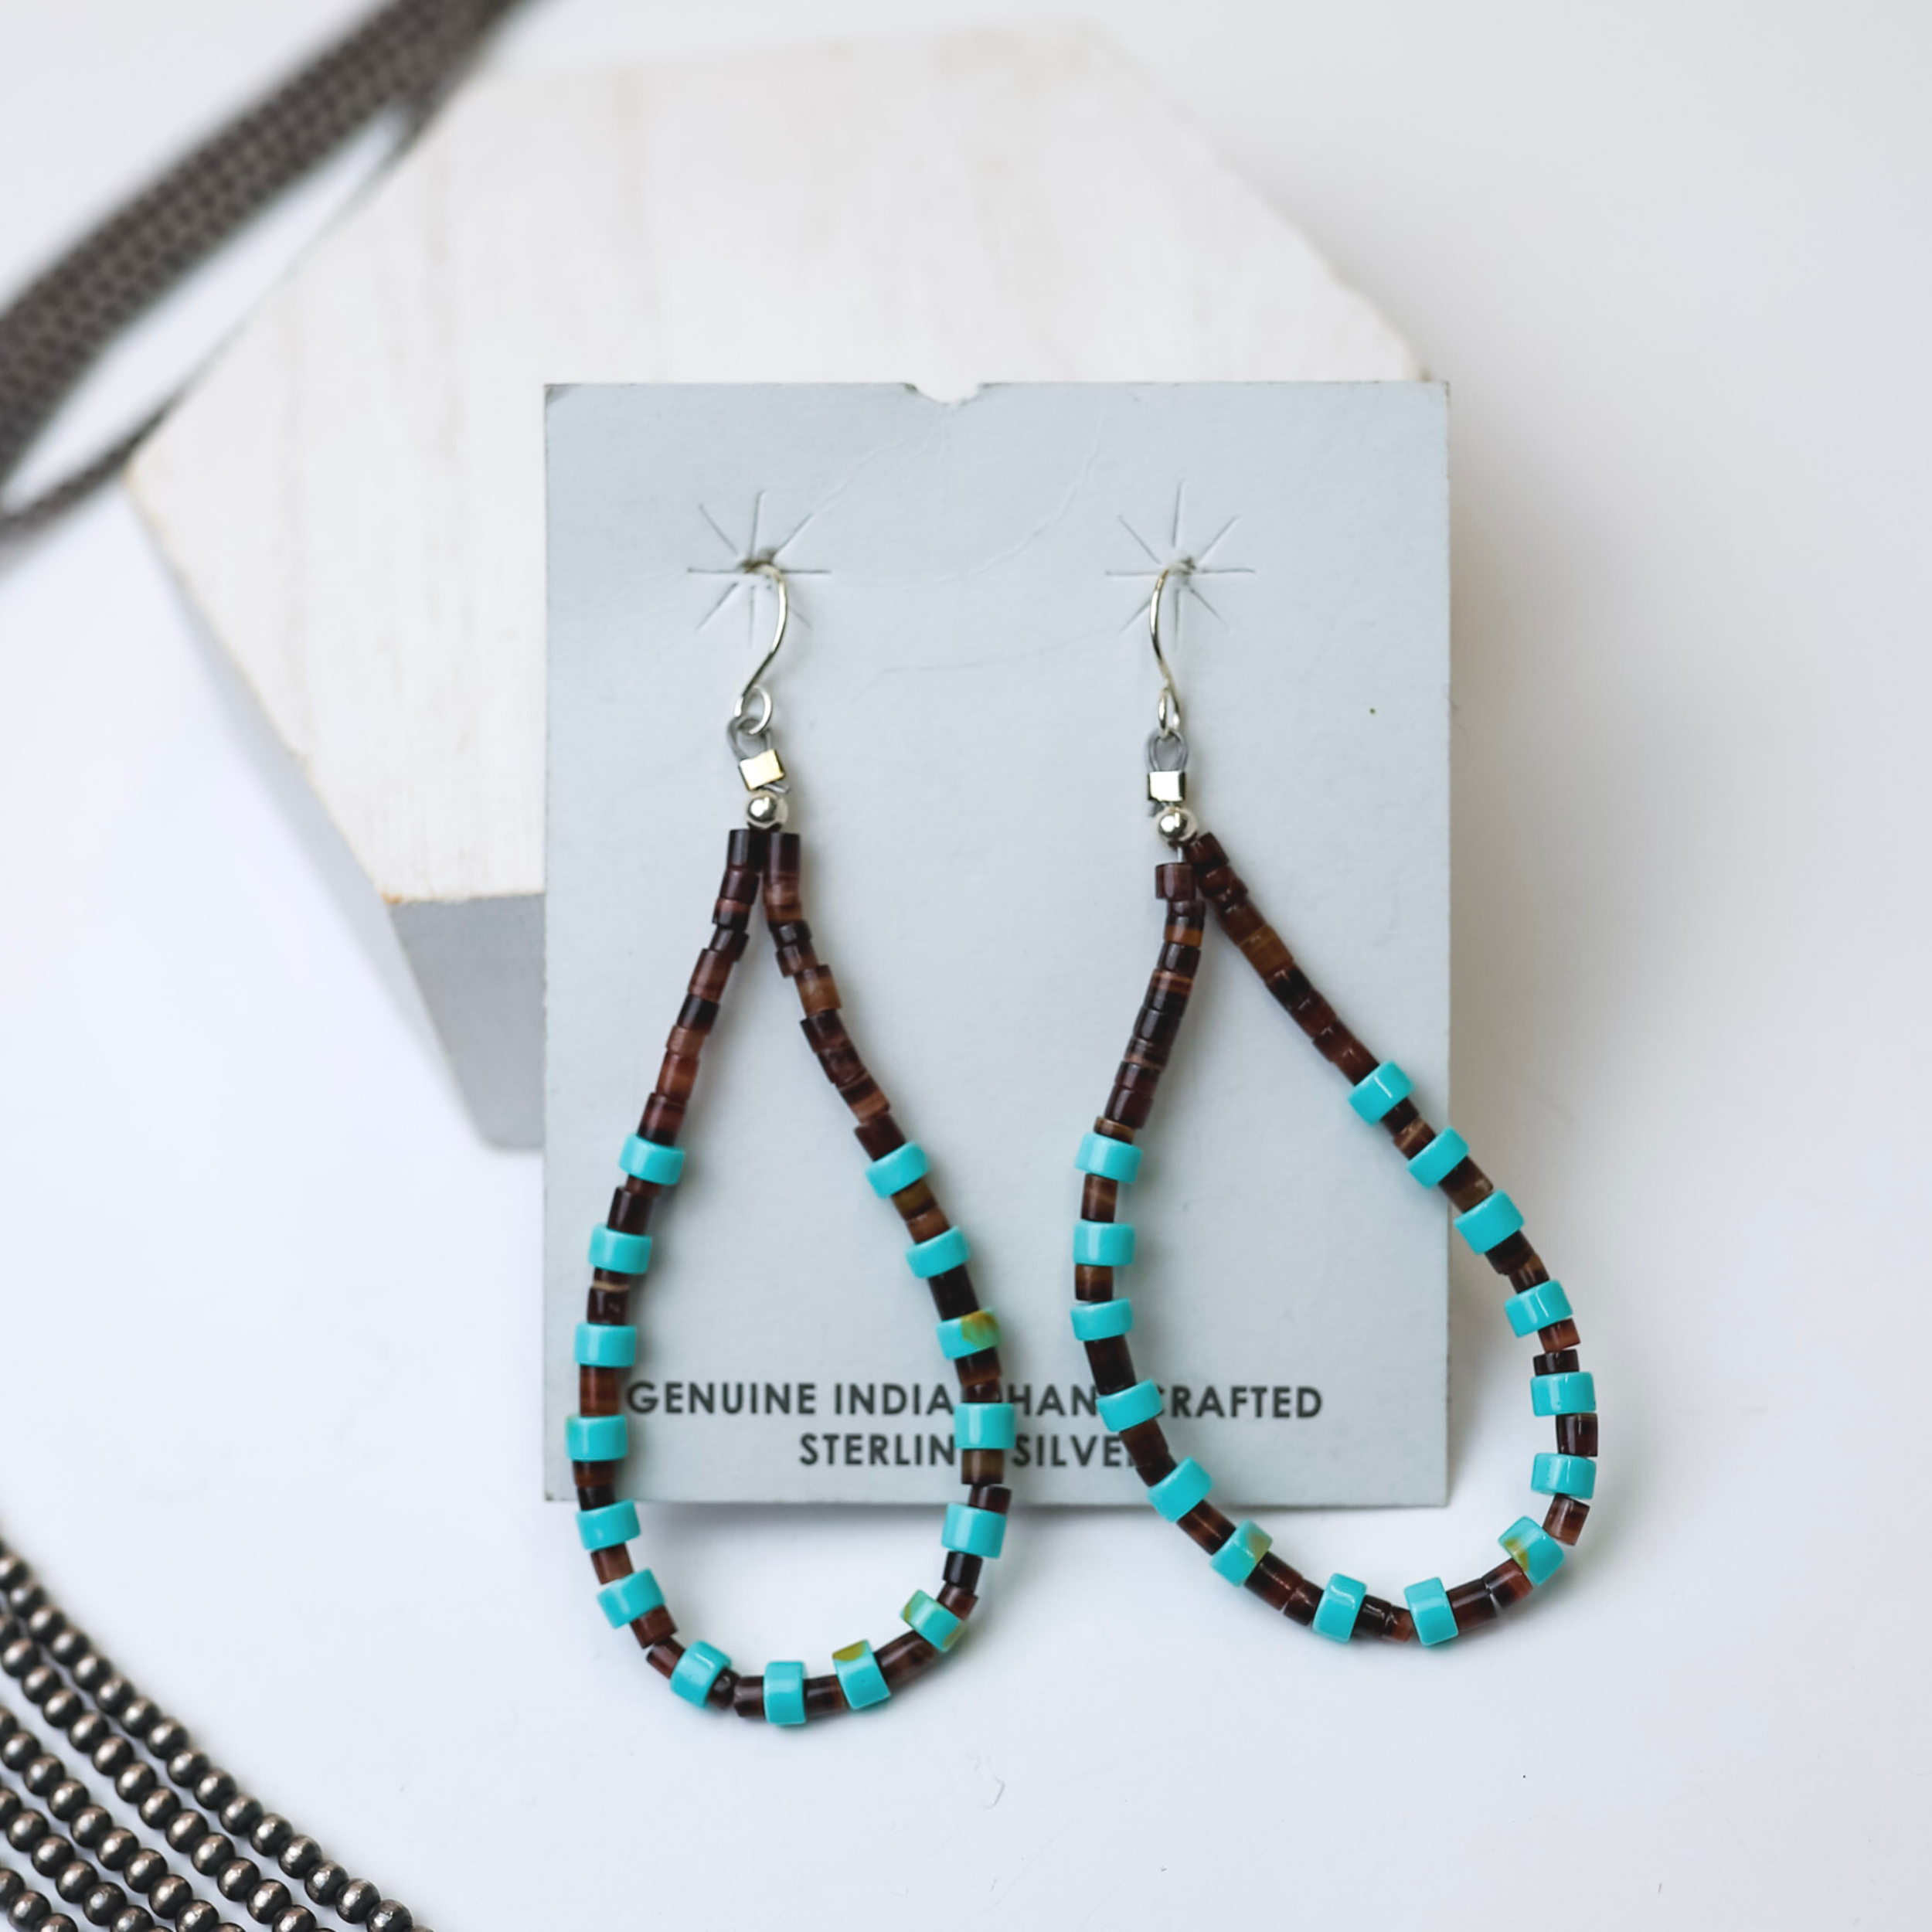 Corraine Smith Navajo Handmade Turquoise Bead Teardrop Earrings bare centered in the middle of the picture with navajo pearls laid on the bottom left corner. All on a white background. 